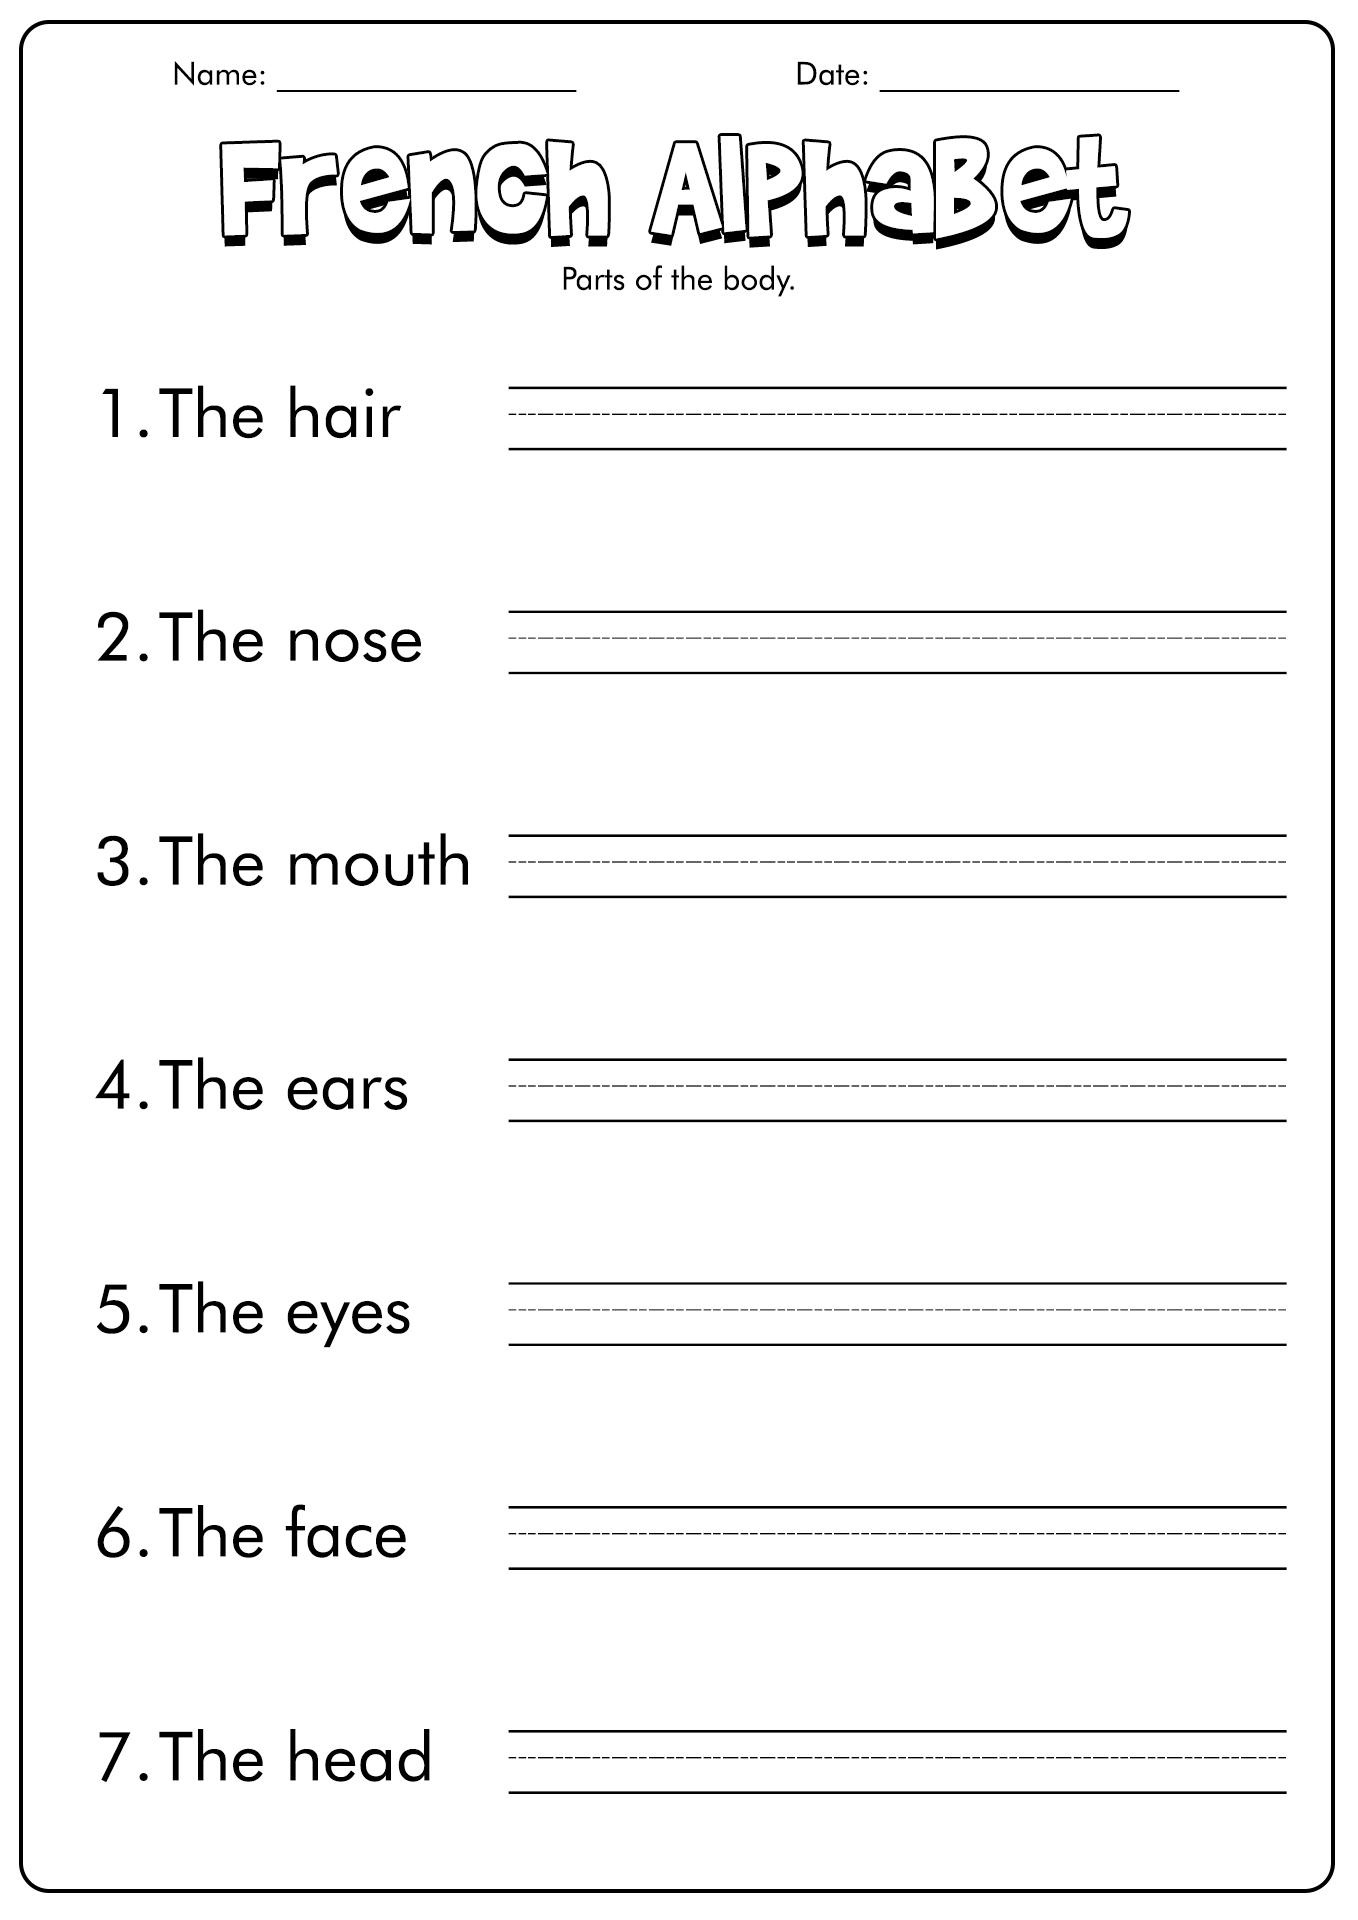 Beginning French Worksheets